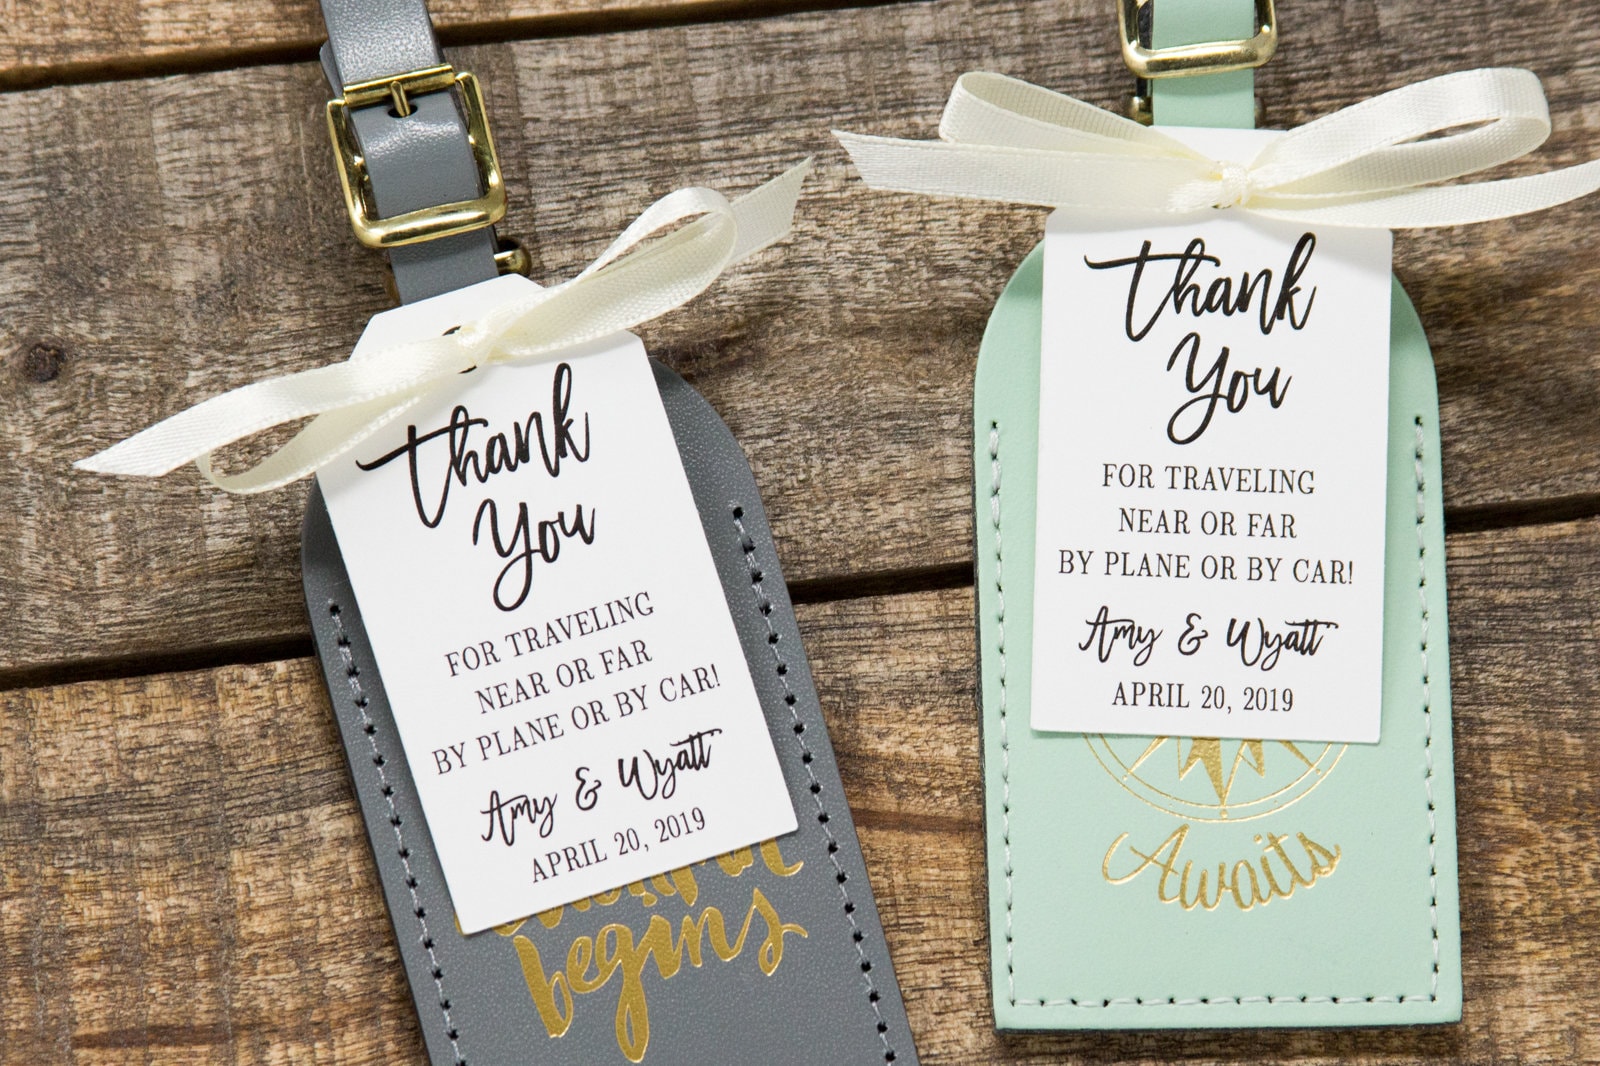 20 THANK YOU FAVOUR LUGGAGE TAGS BUTTERFLY Ivory GoldWedding Anniversary 